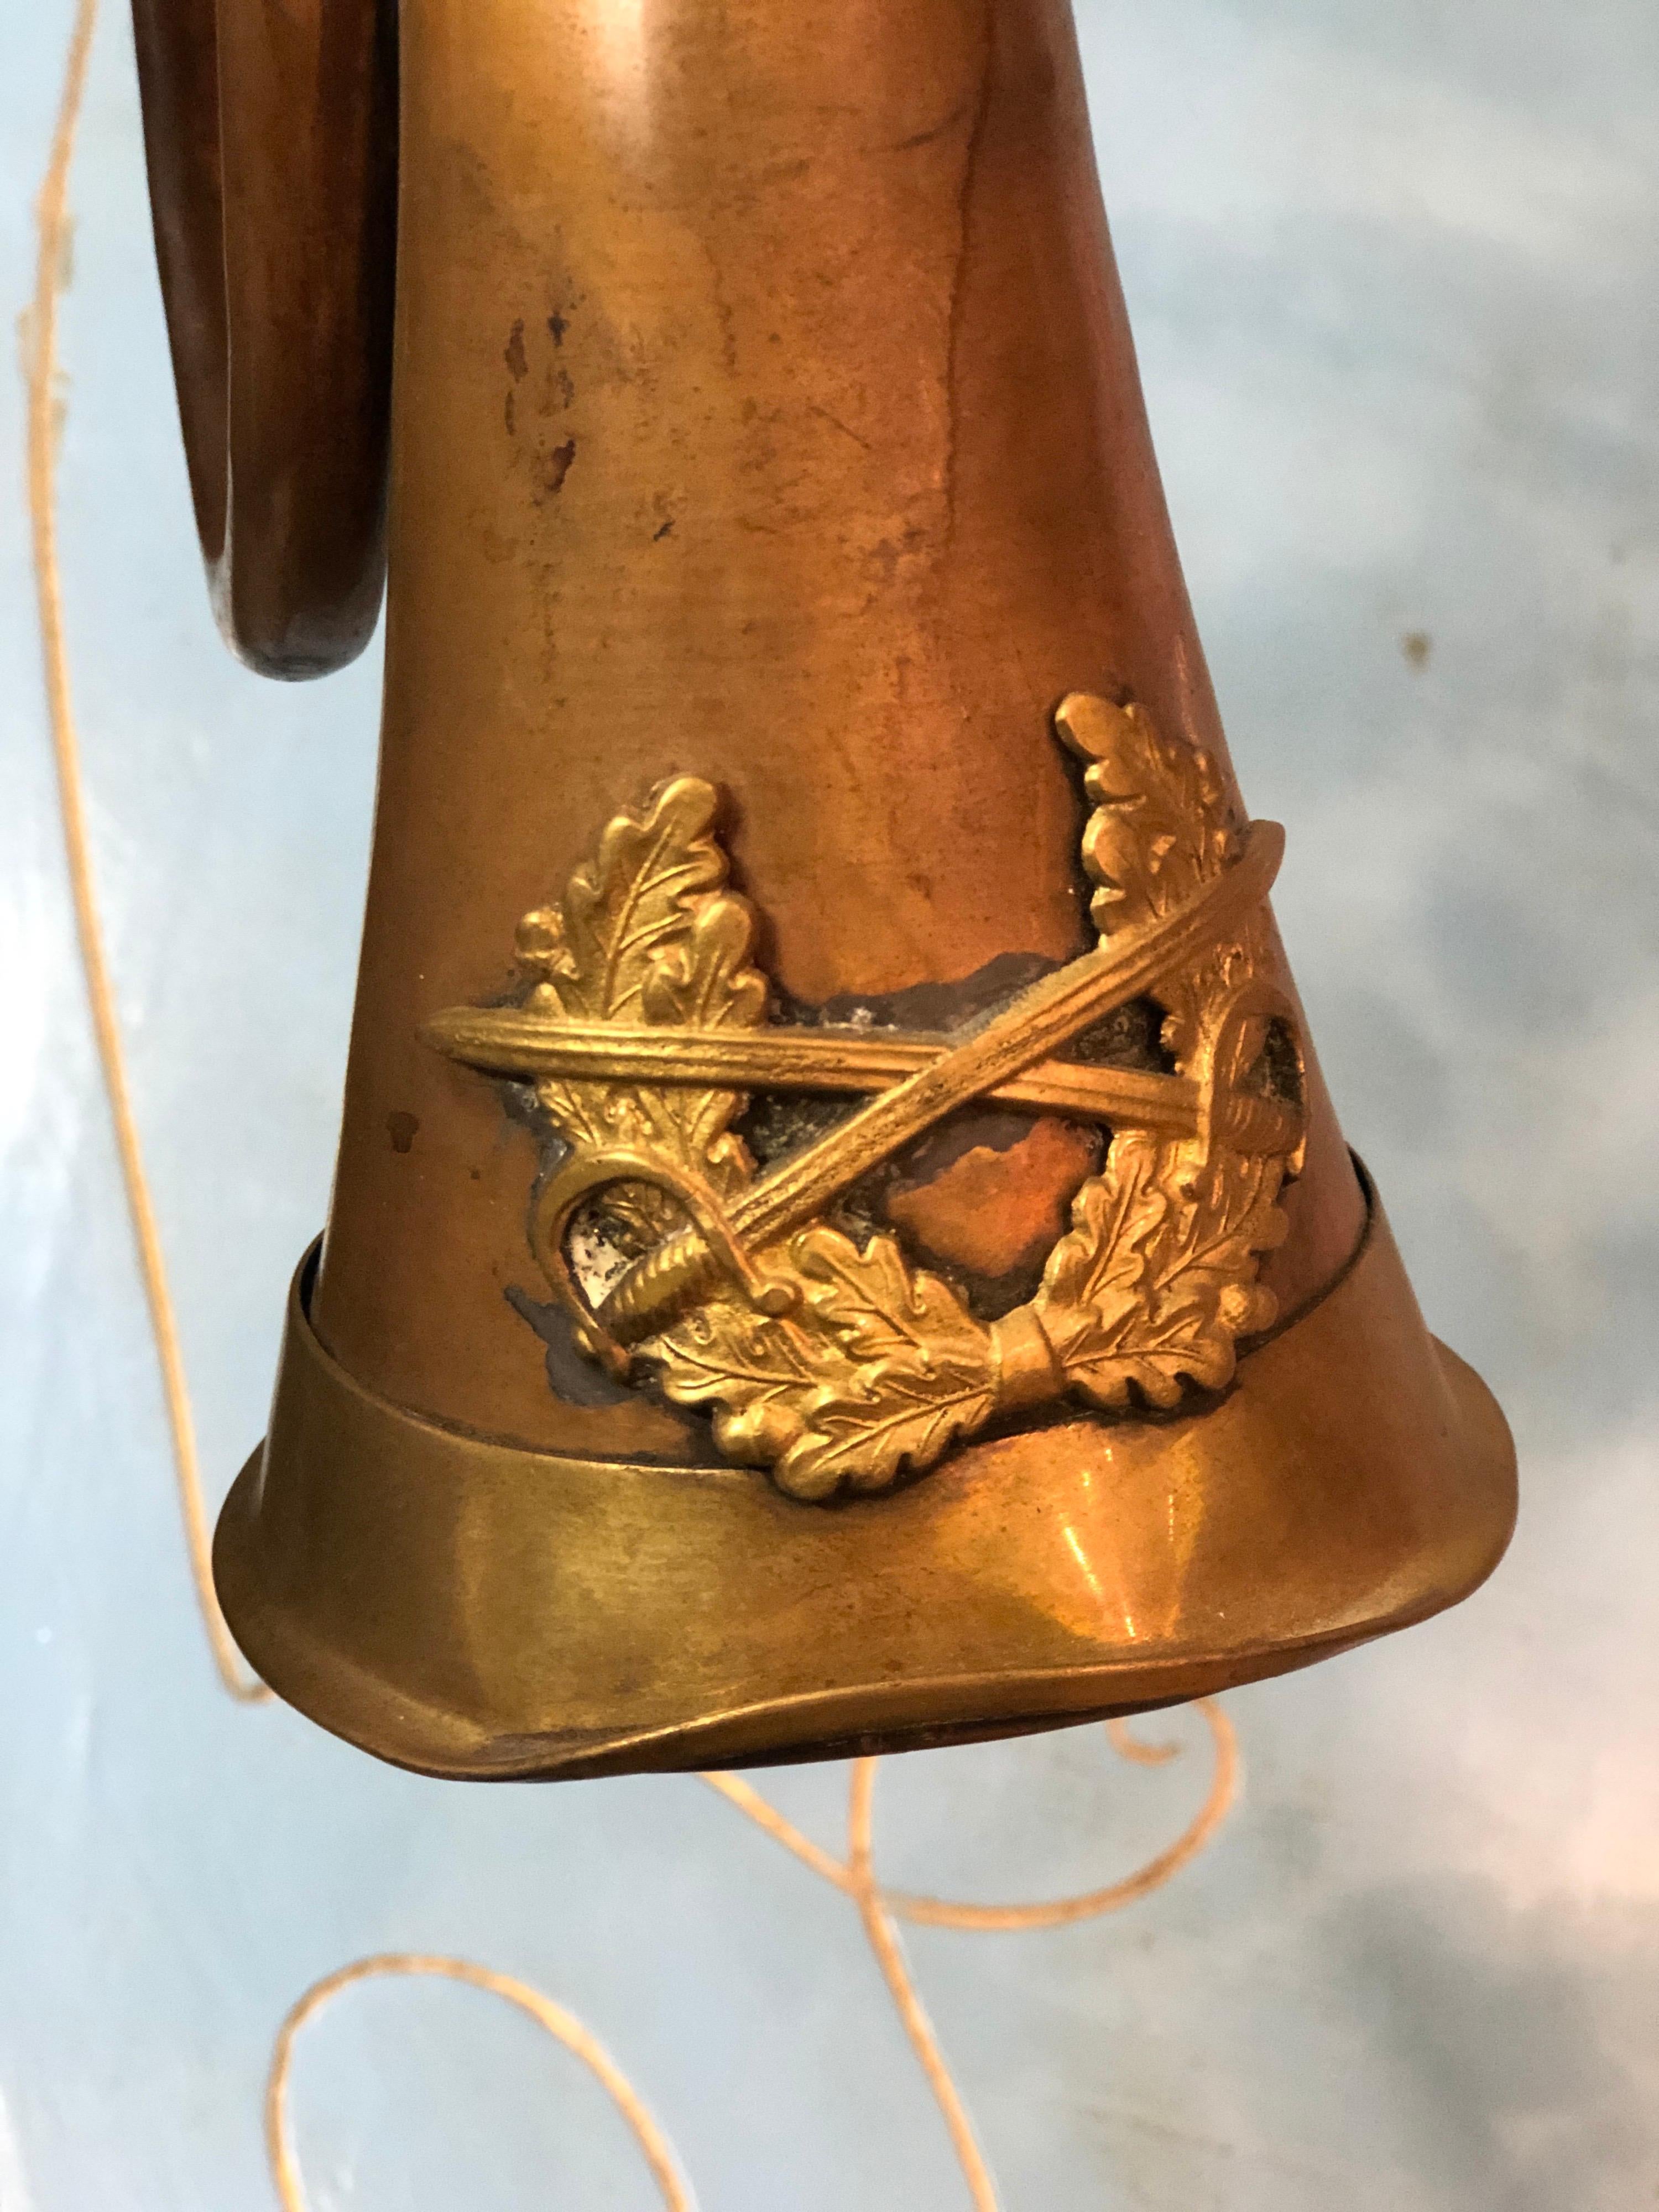 military bugle for sale